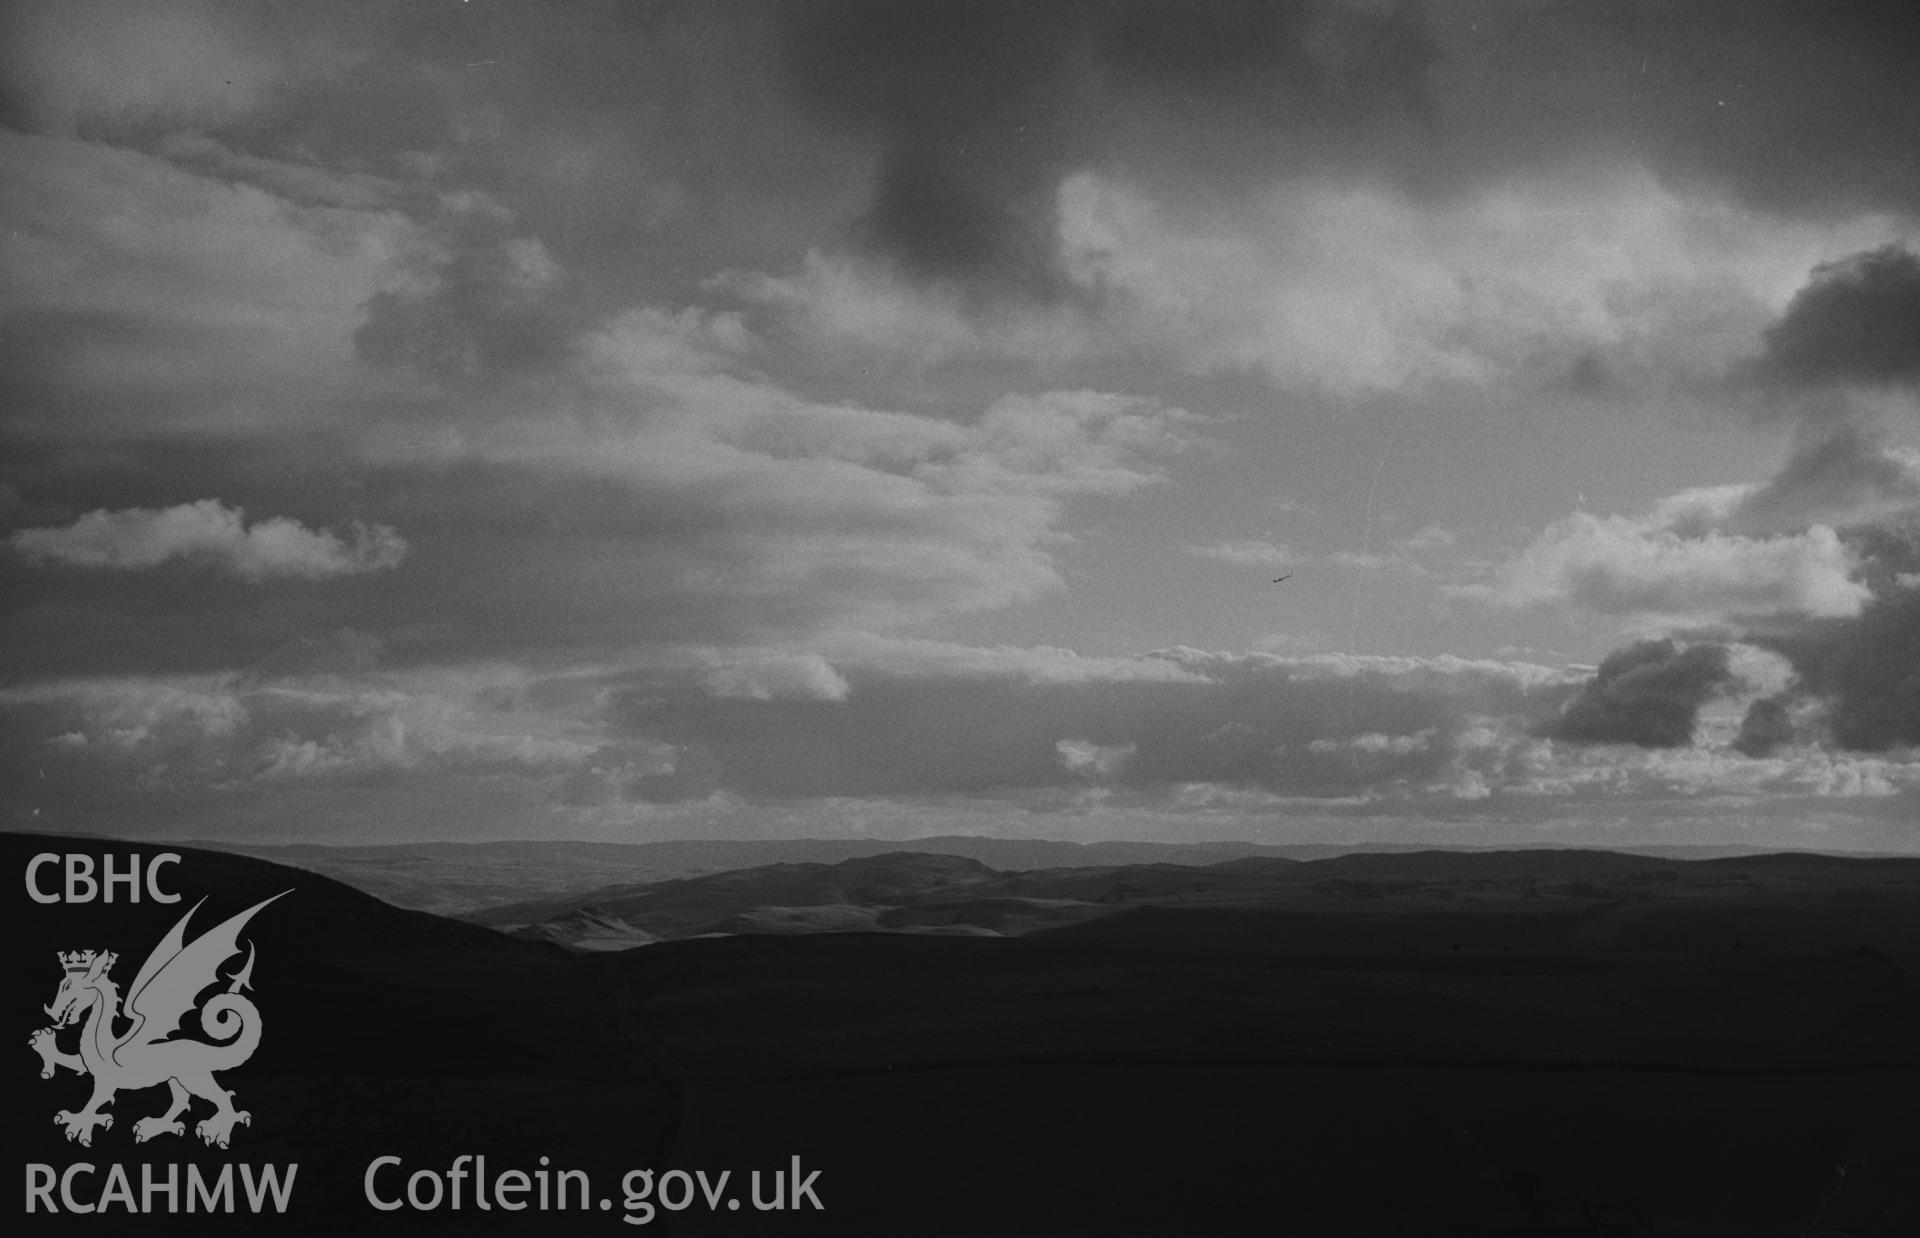 Digital copy of black and white negative showing view looking across the Rheidol valley from the Cwm-Brwyno to Ystumtuen road on Banc Bwa-drain. Photographed by Arthur O. Chater on 28th January 1968 looking south south east from Grid Reference SN 721 803.